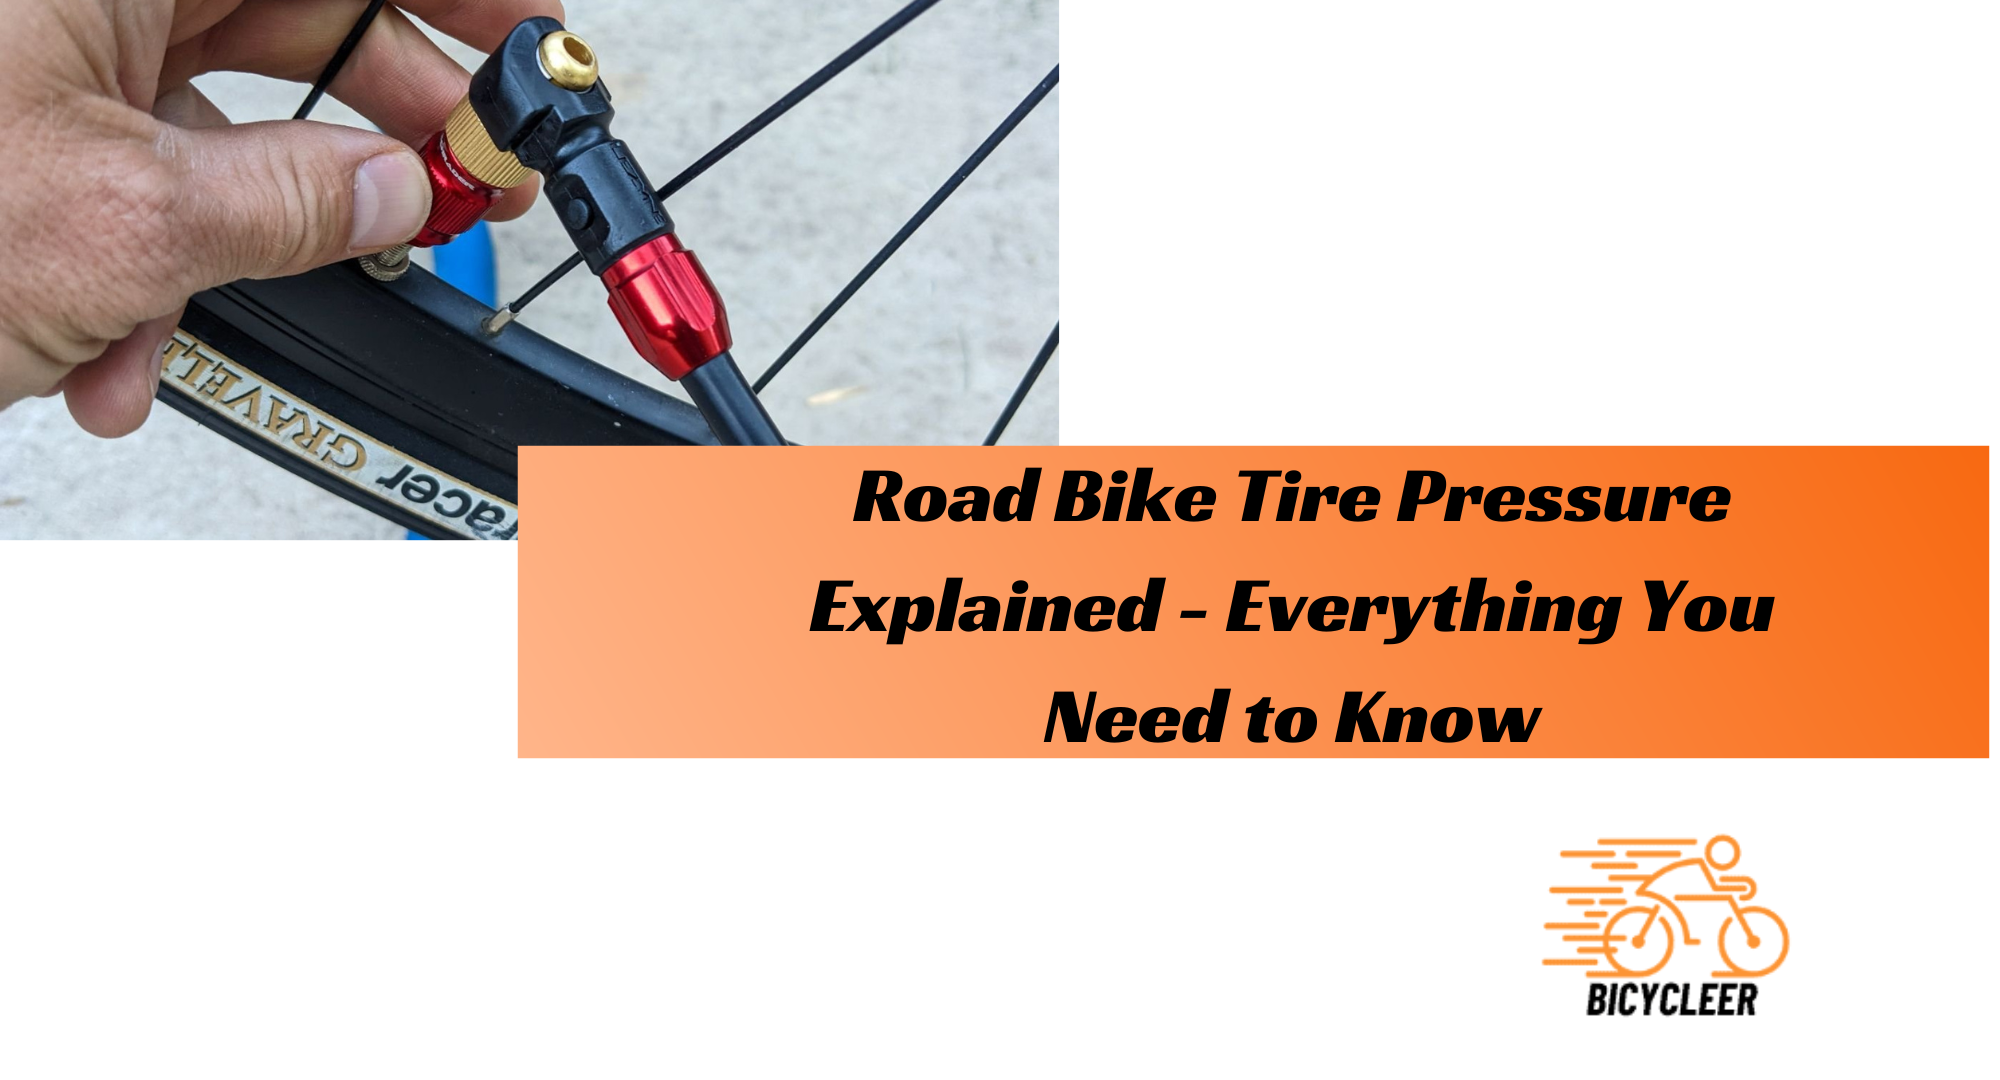 Road Bike Tire Pressure Explained - Everything You Need to Know